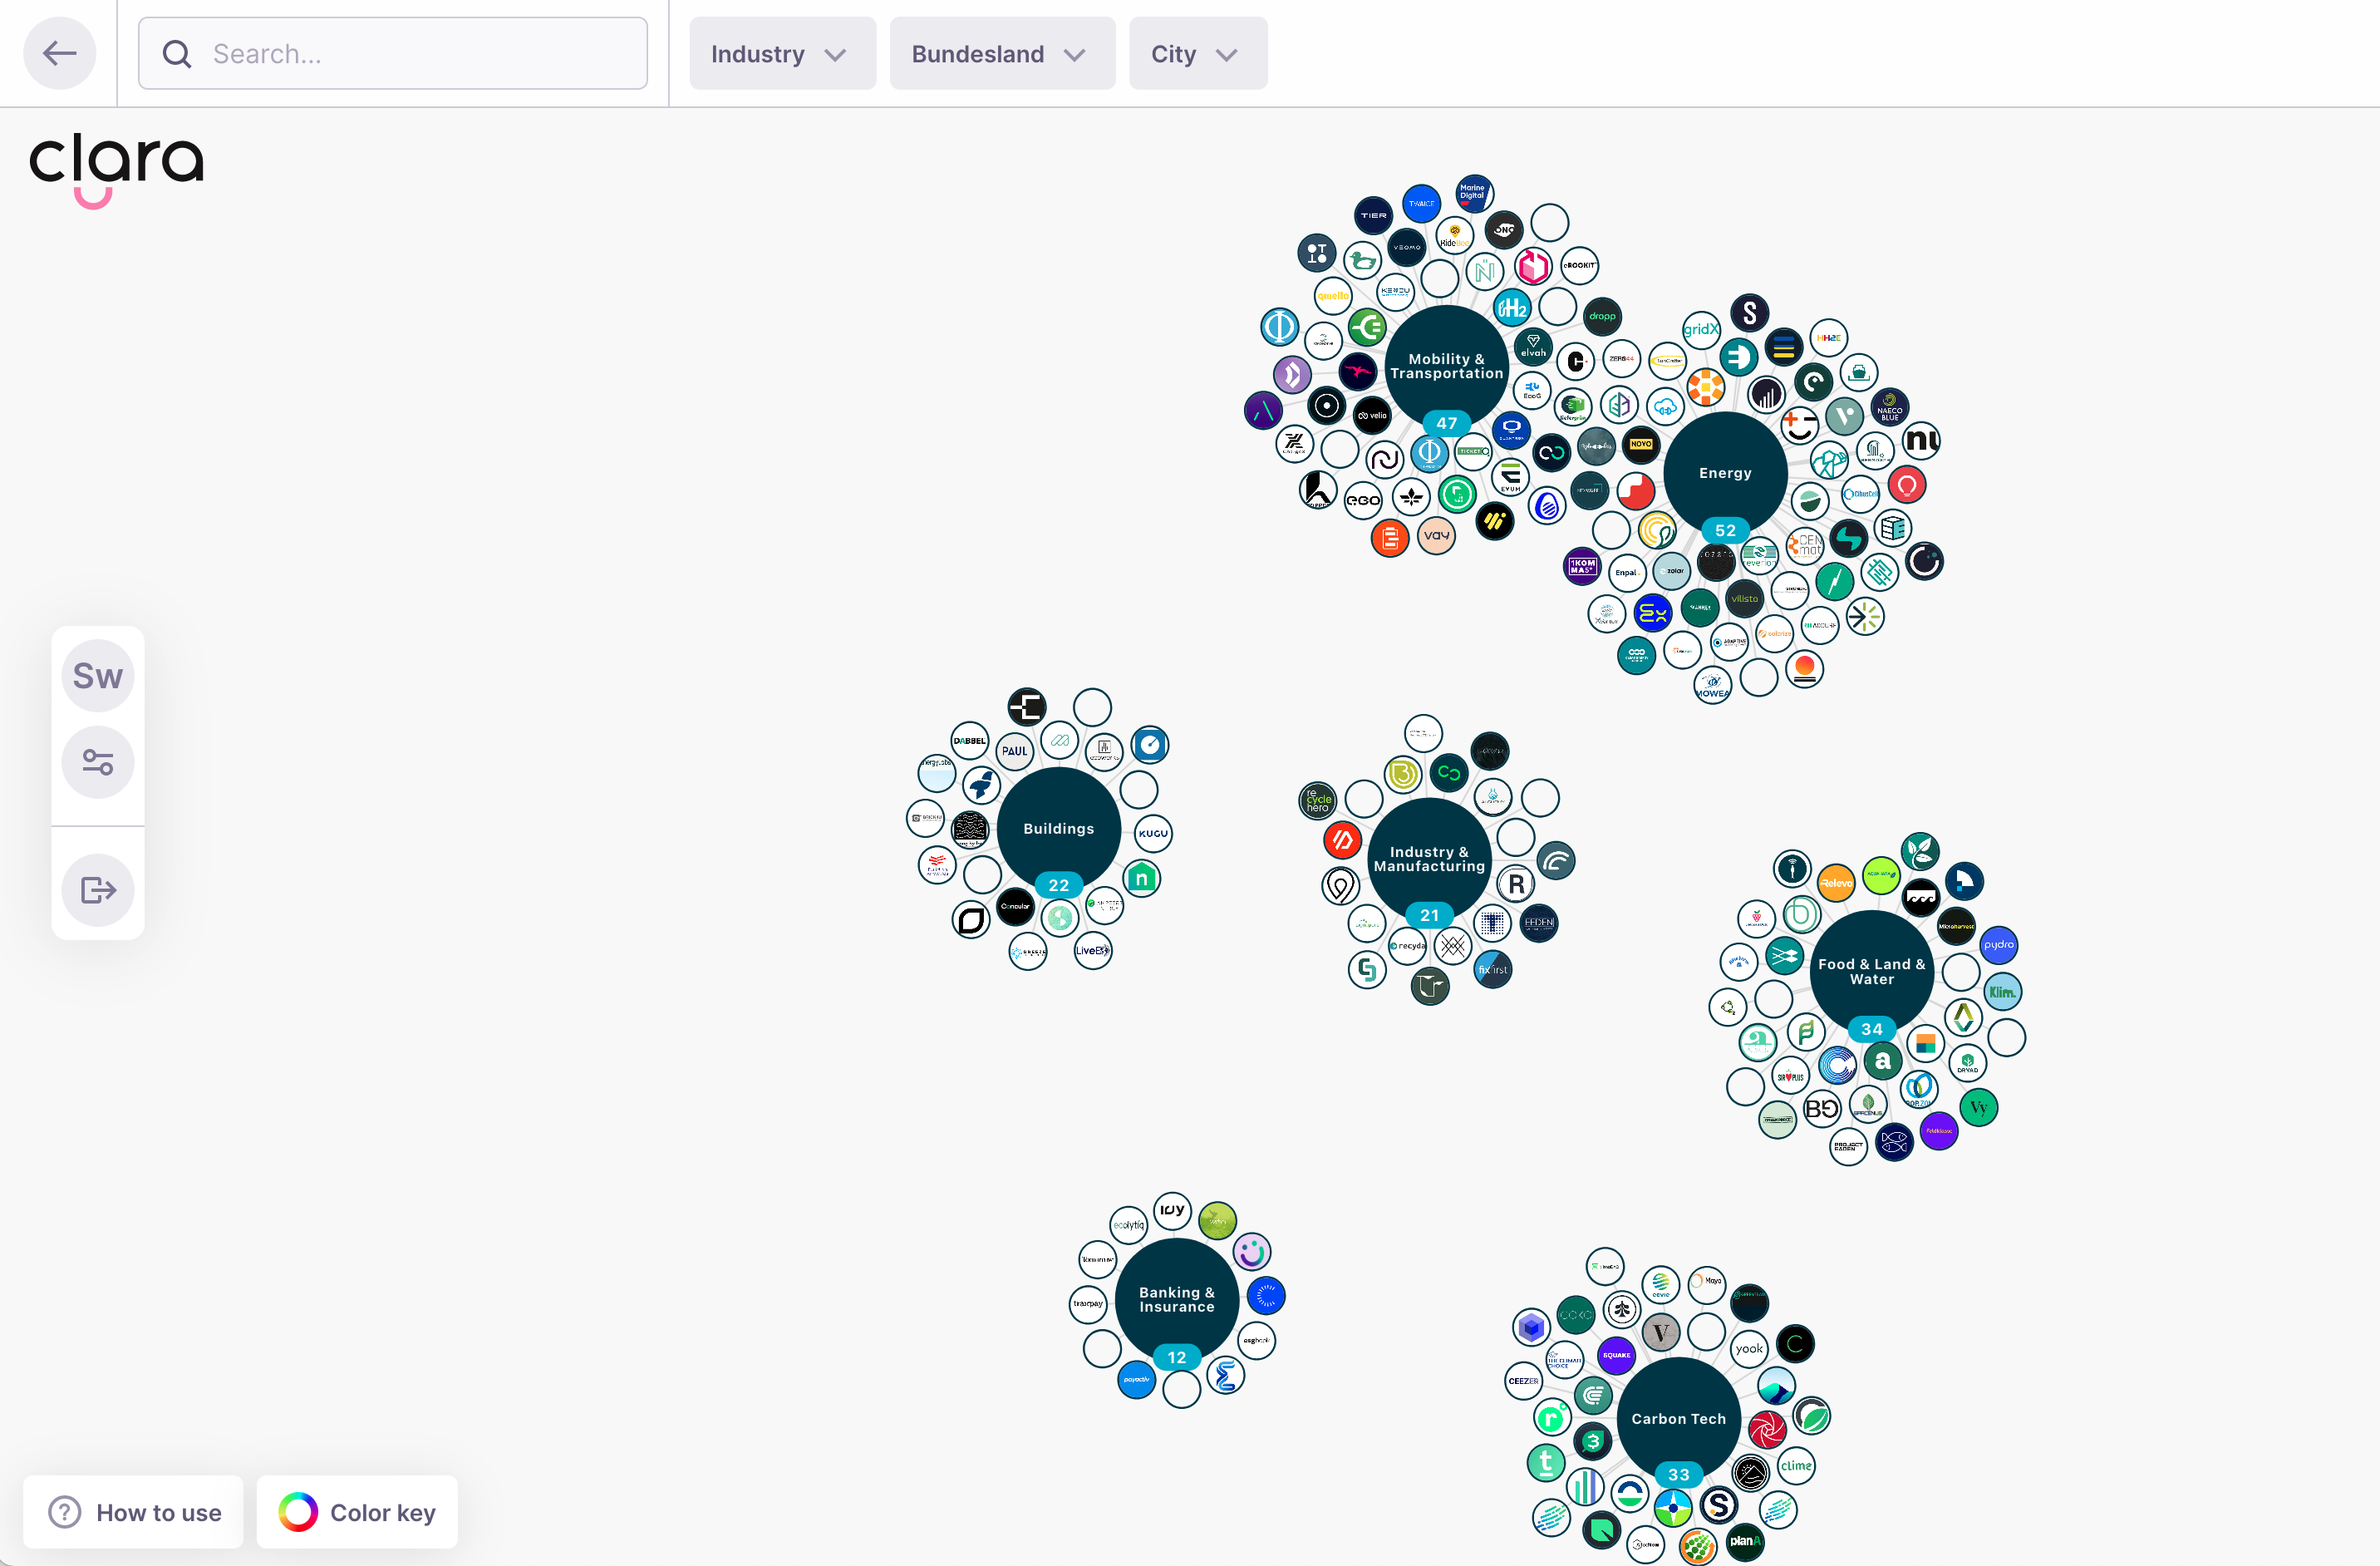 A simple network map of companies and their industries